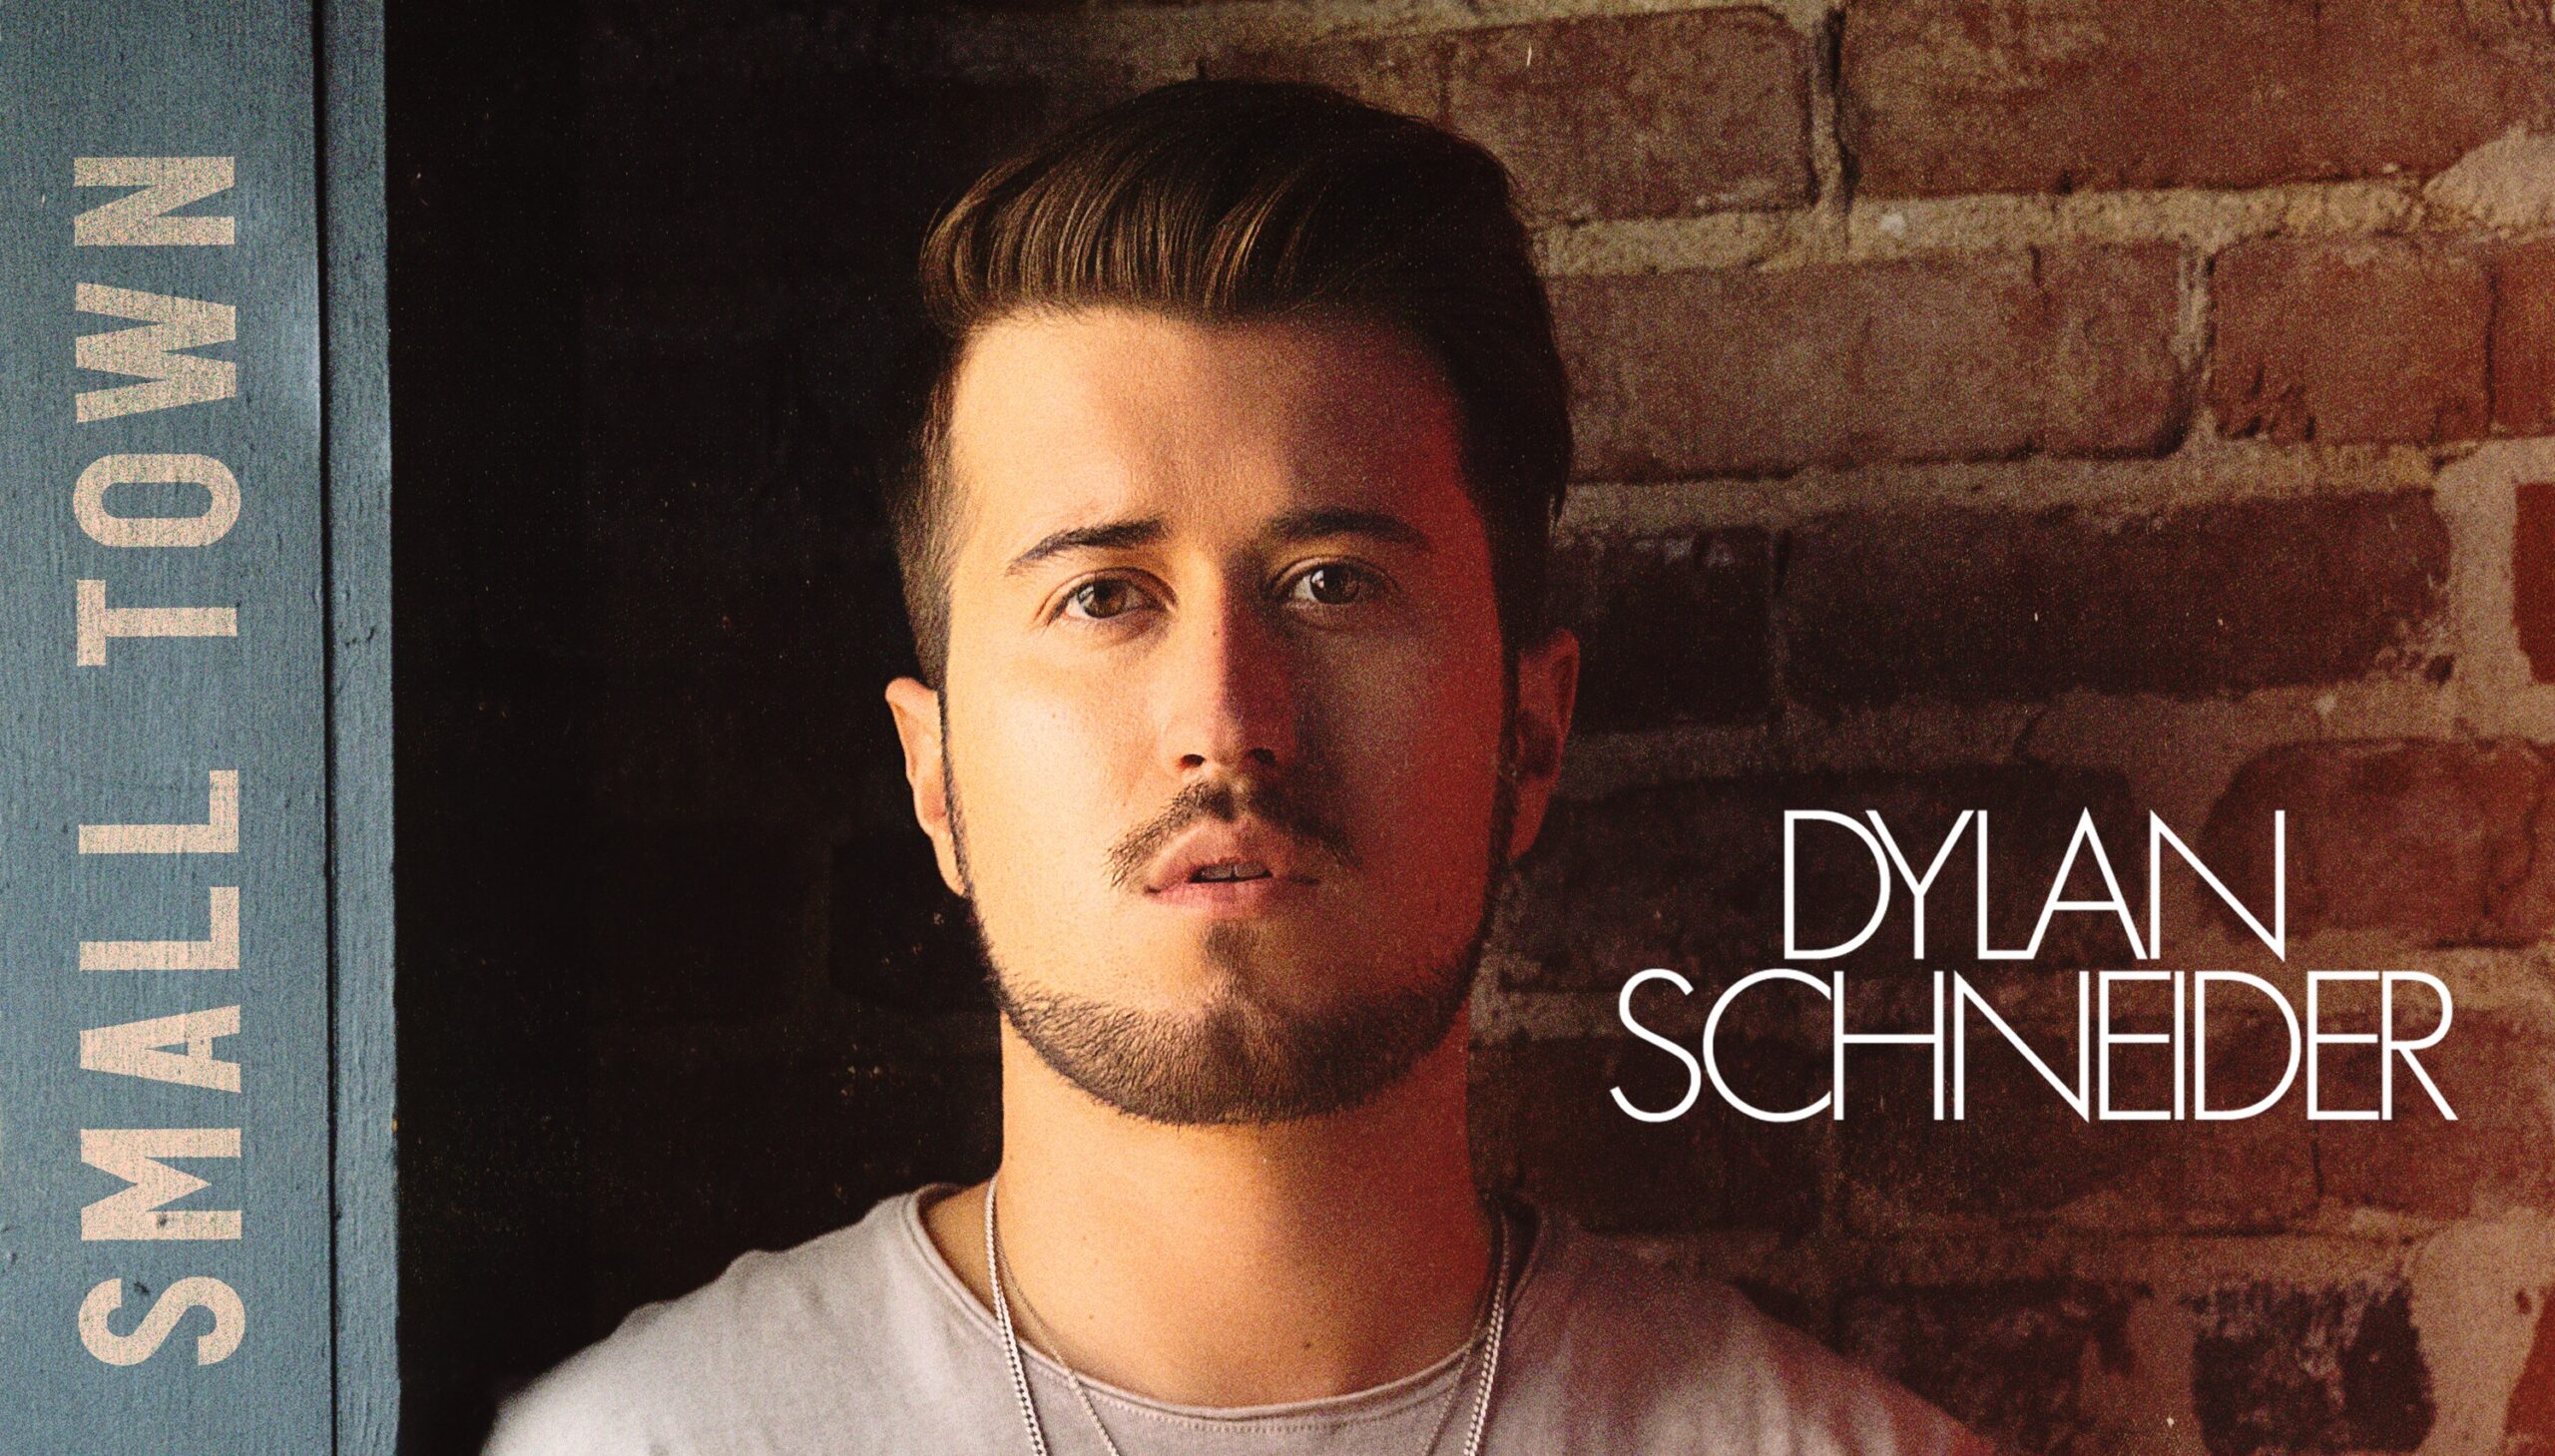 Dylan Schneider Pulls at the Heart Strings with New Single “Lost in a Small Town” (Listen)